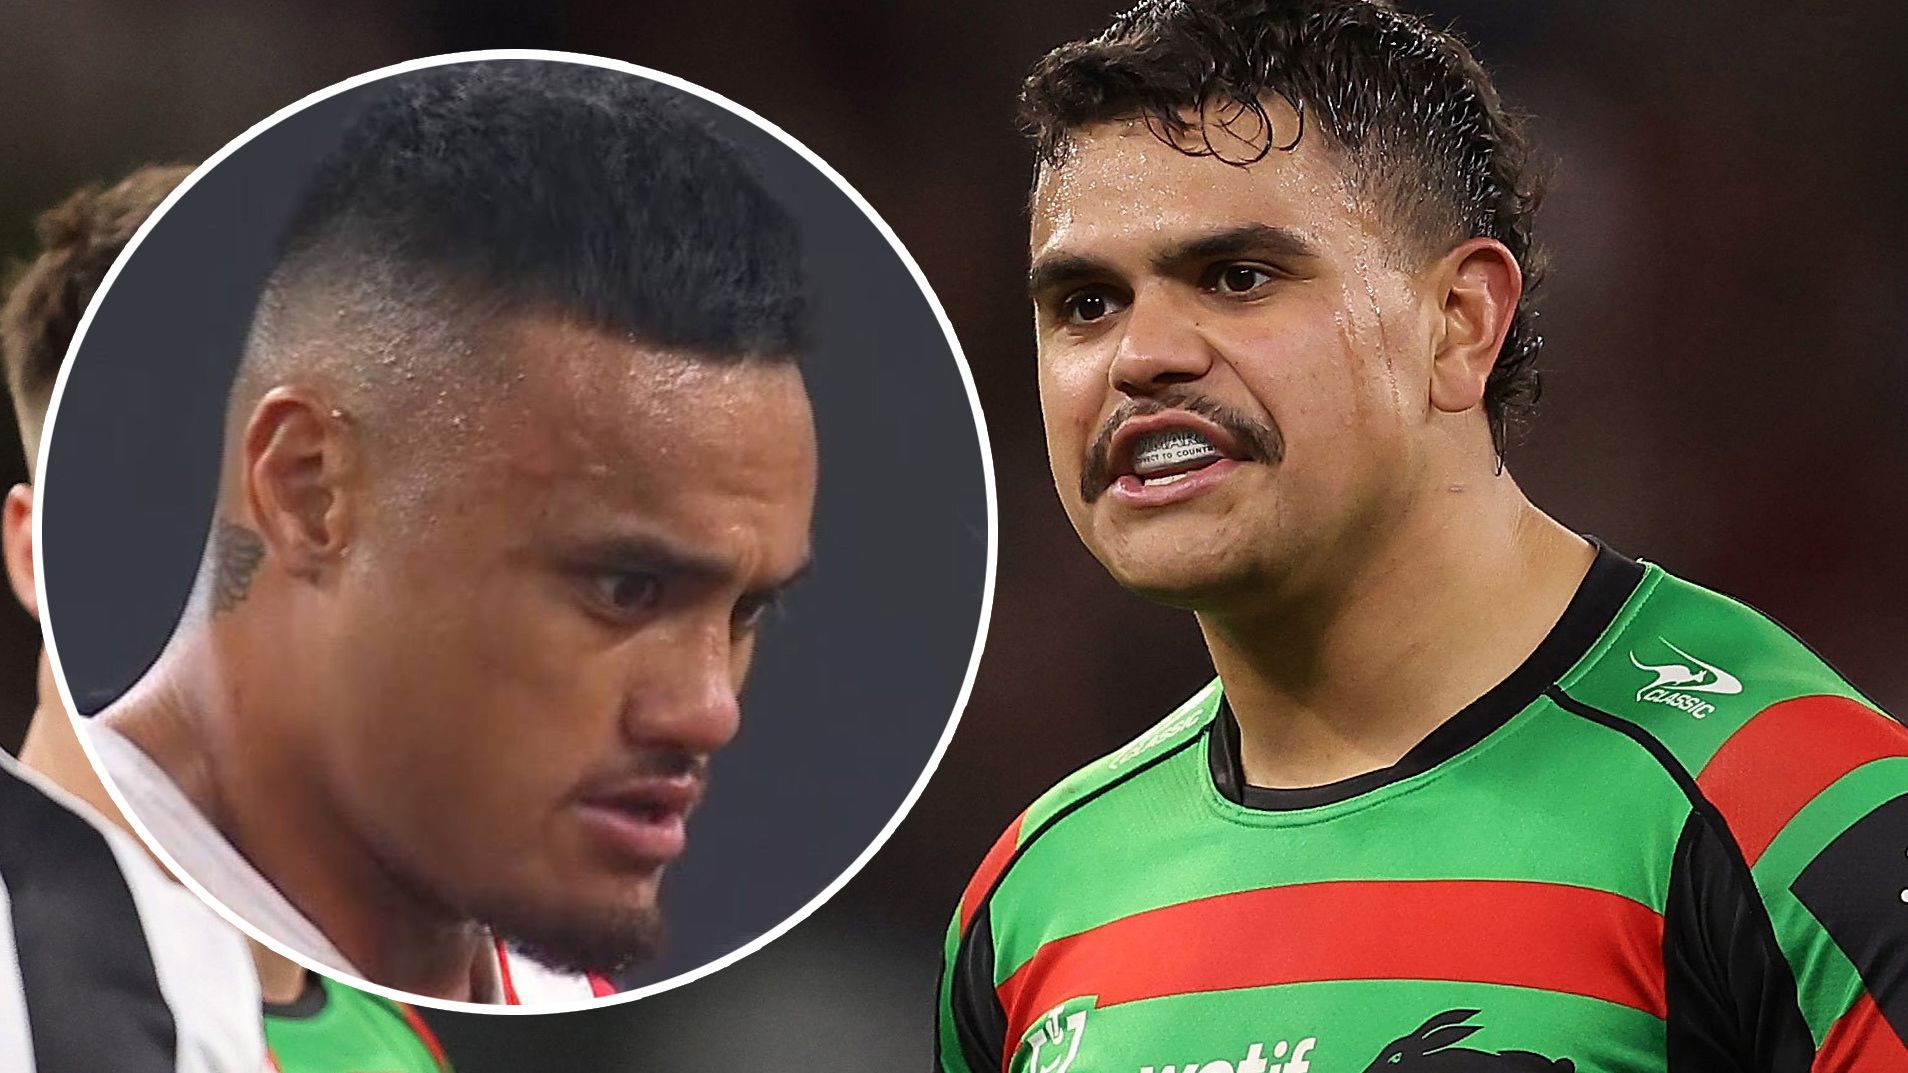 'And some...': Latrell Mitchell demands NRL ban Spencer Leniu for more than half the season